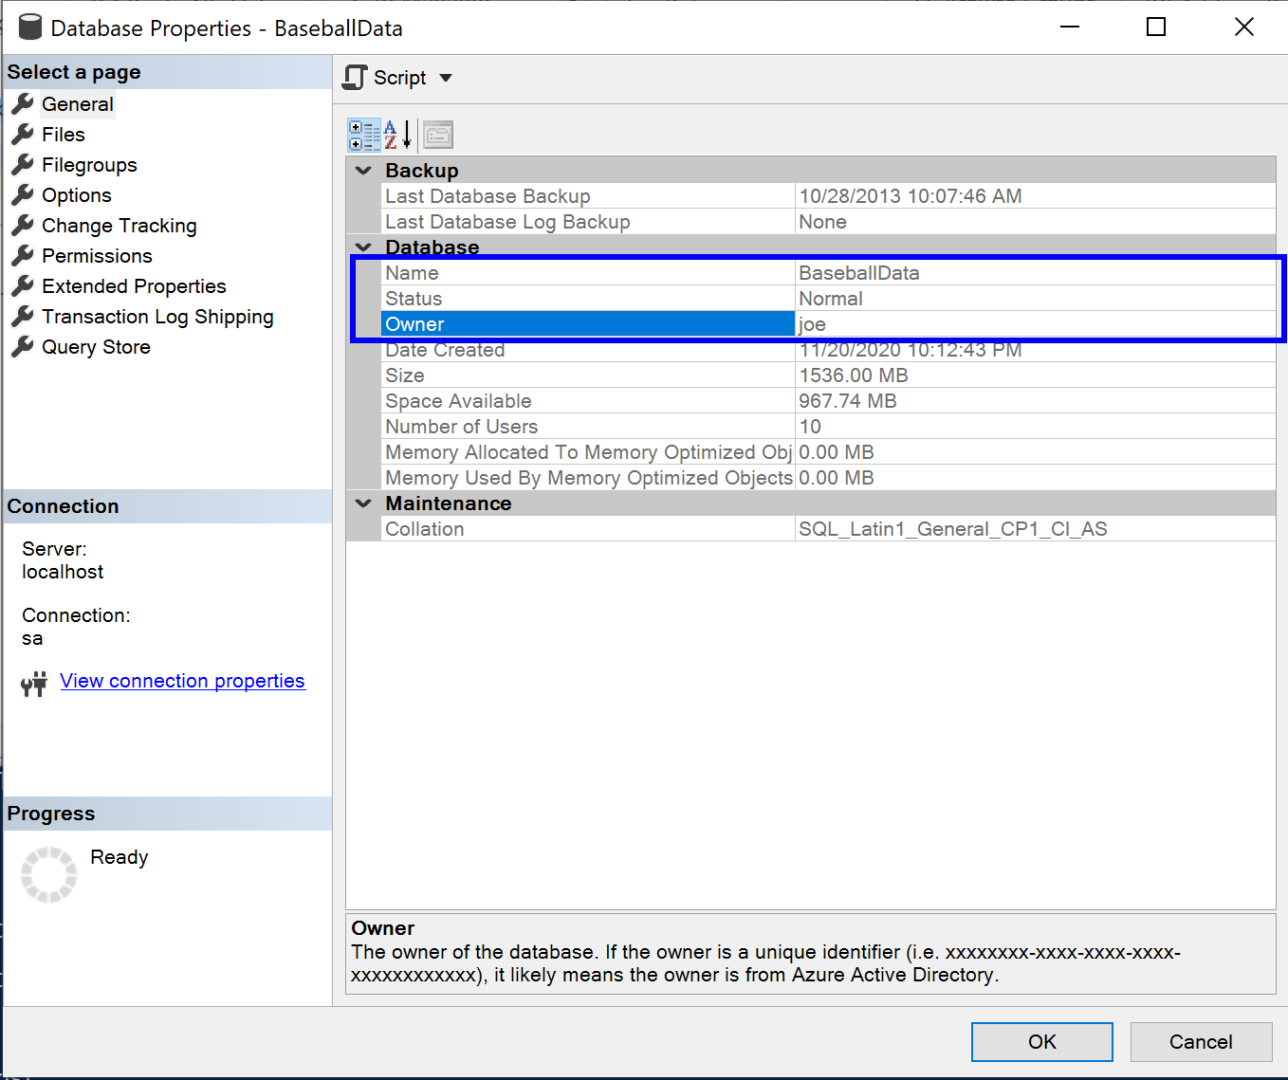 how to change db owner in sql server 2012